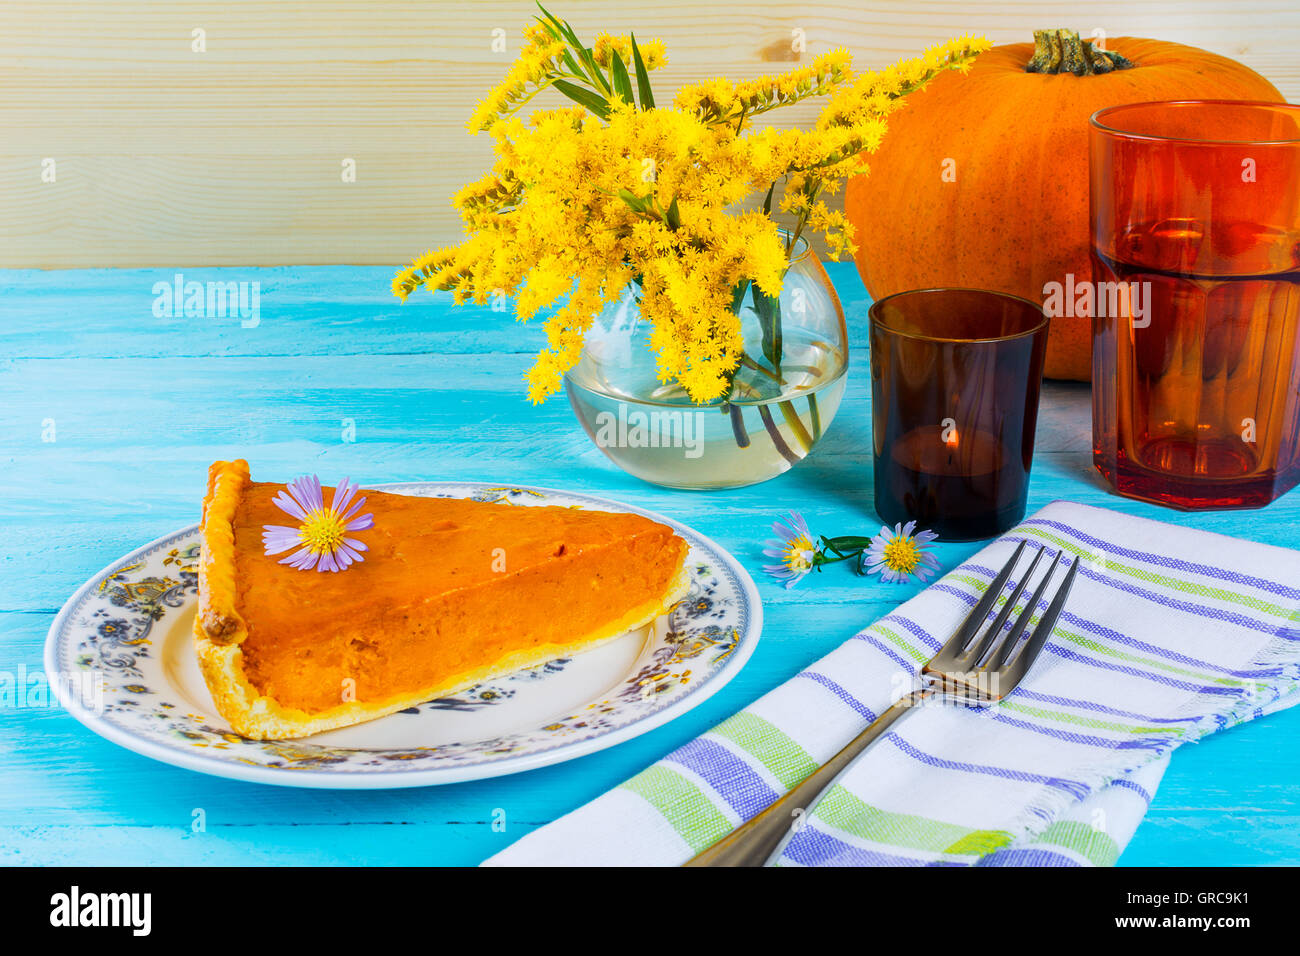 Thanksgiving pumpkin pie slice on the blue wooden table. Traditional Thanksgiving pumpkin pastry. Stock Photo